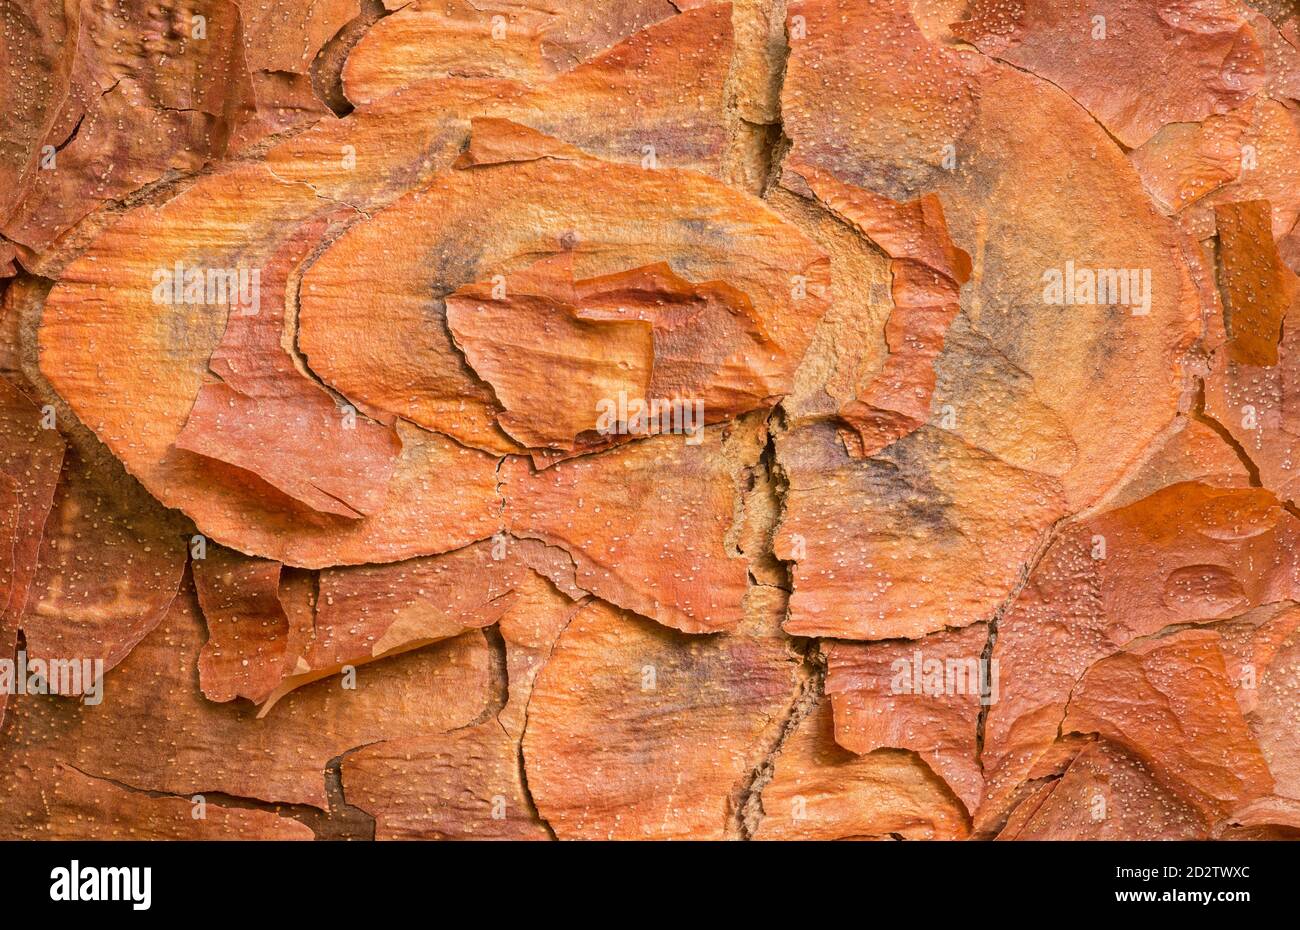 Macro photograph of the patterns and textures in the bark of a Paperbark Maple (Acer griseum) Stock Photo